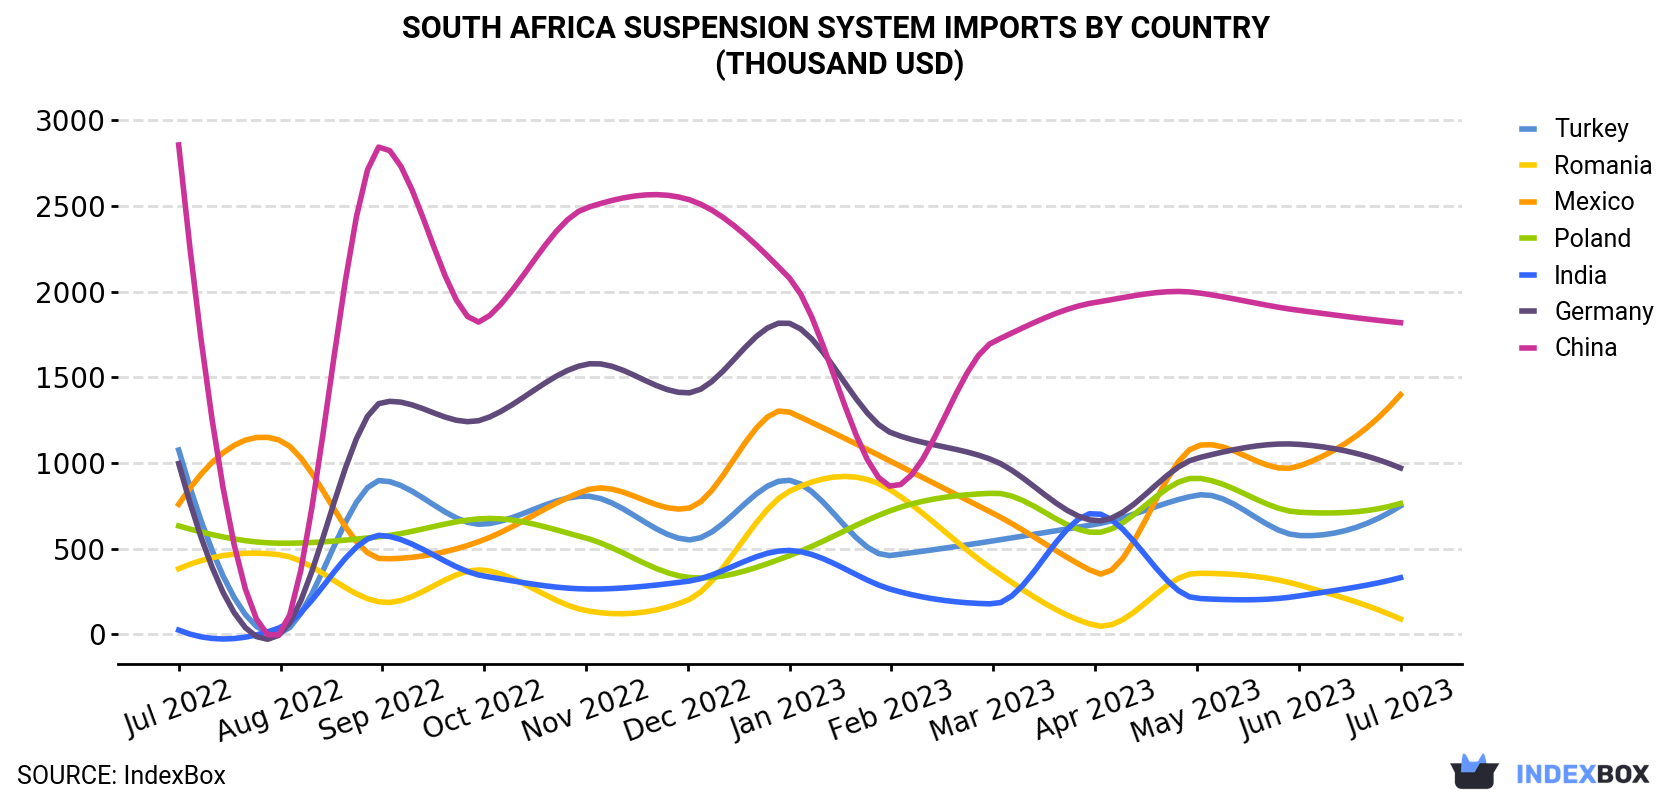 South Africa Suspension System Imports By Country (Thousand USD)